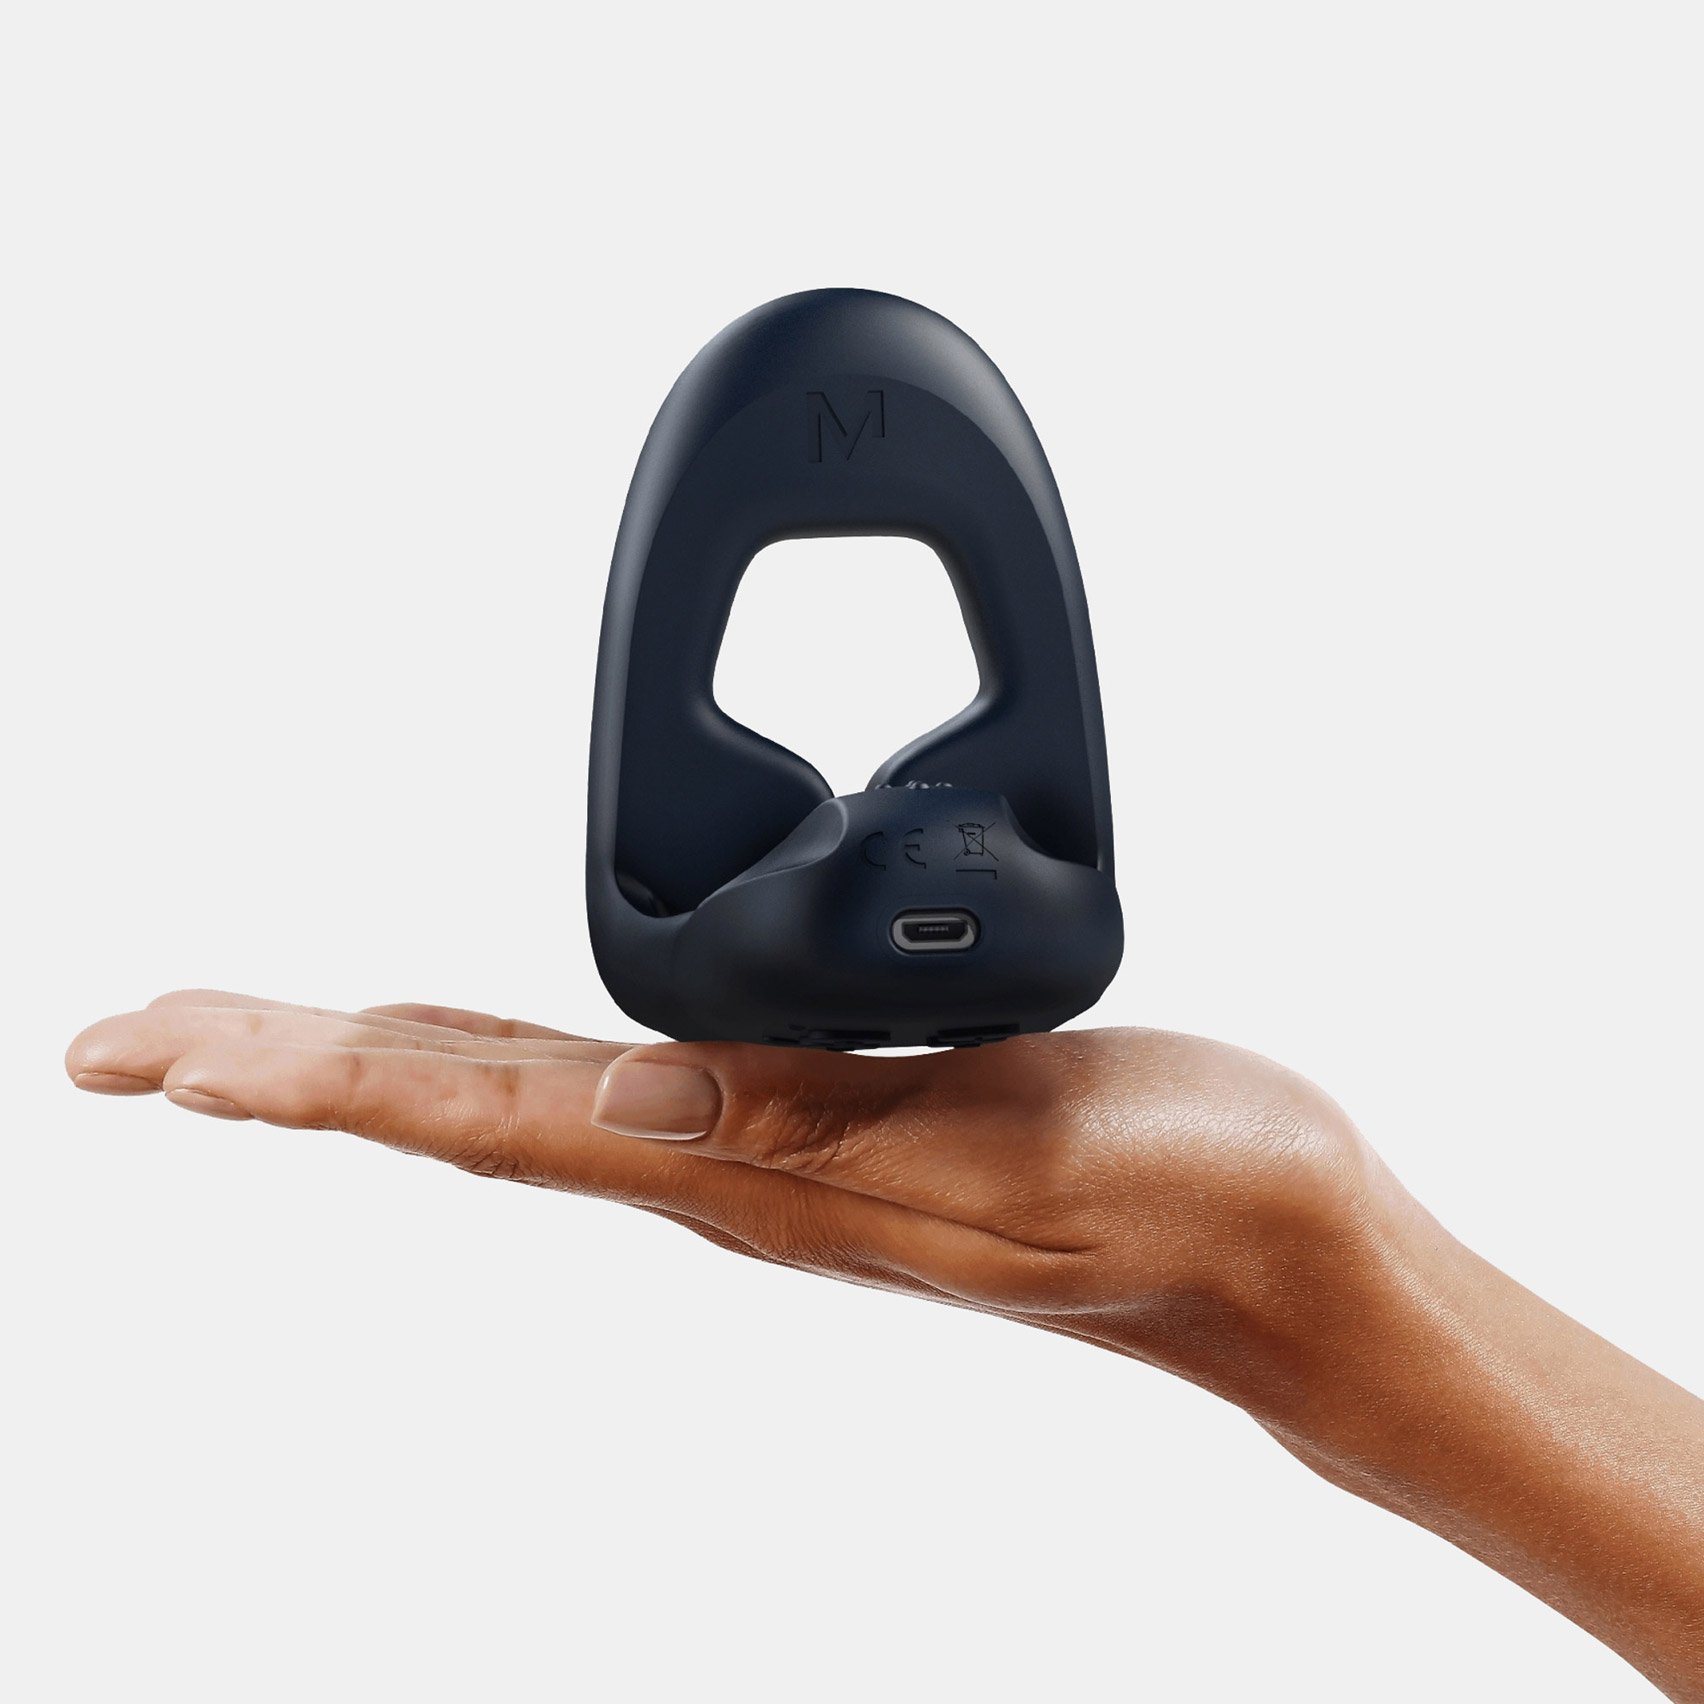 Tenuto 2 is a wearable vibrator designed to tackle erectile dysfunction pic